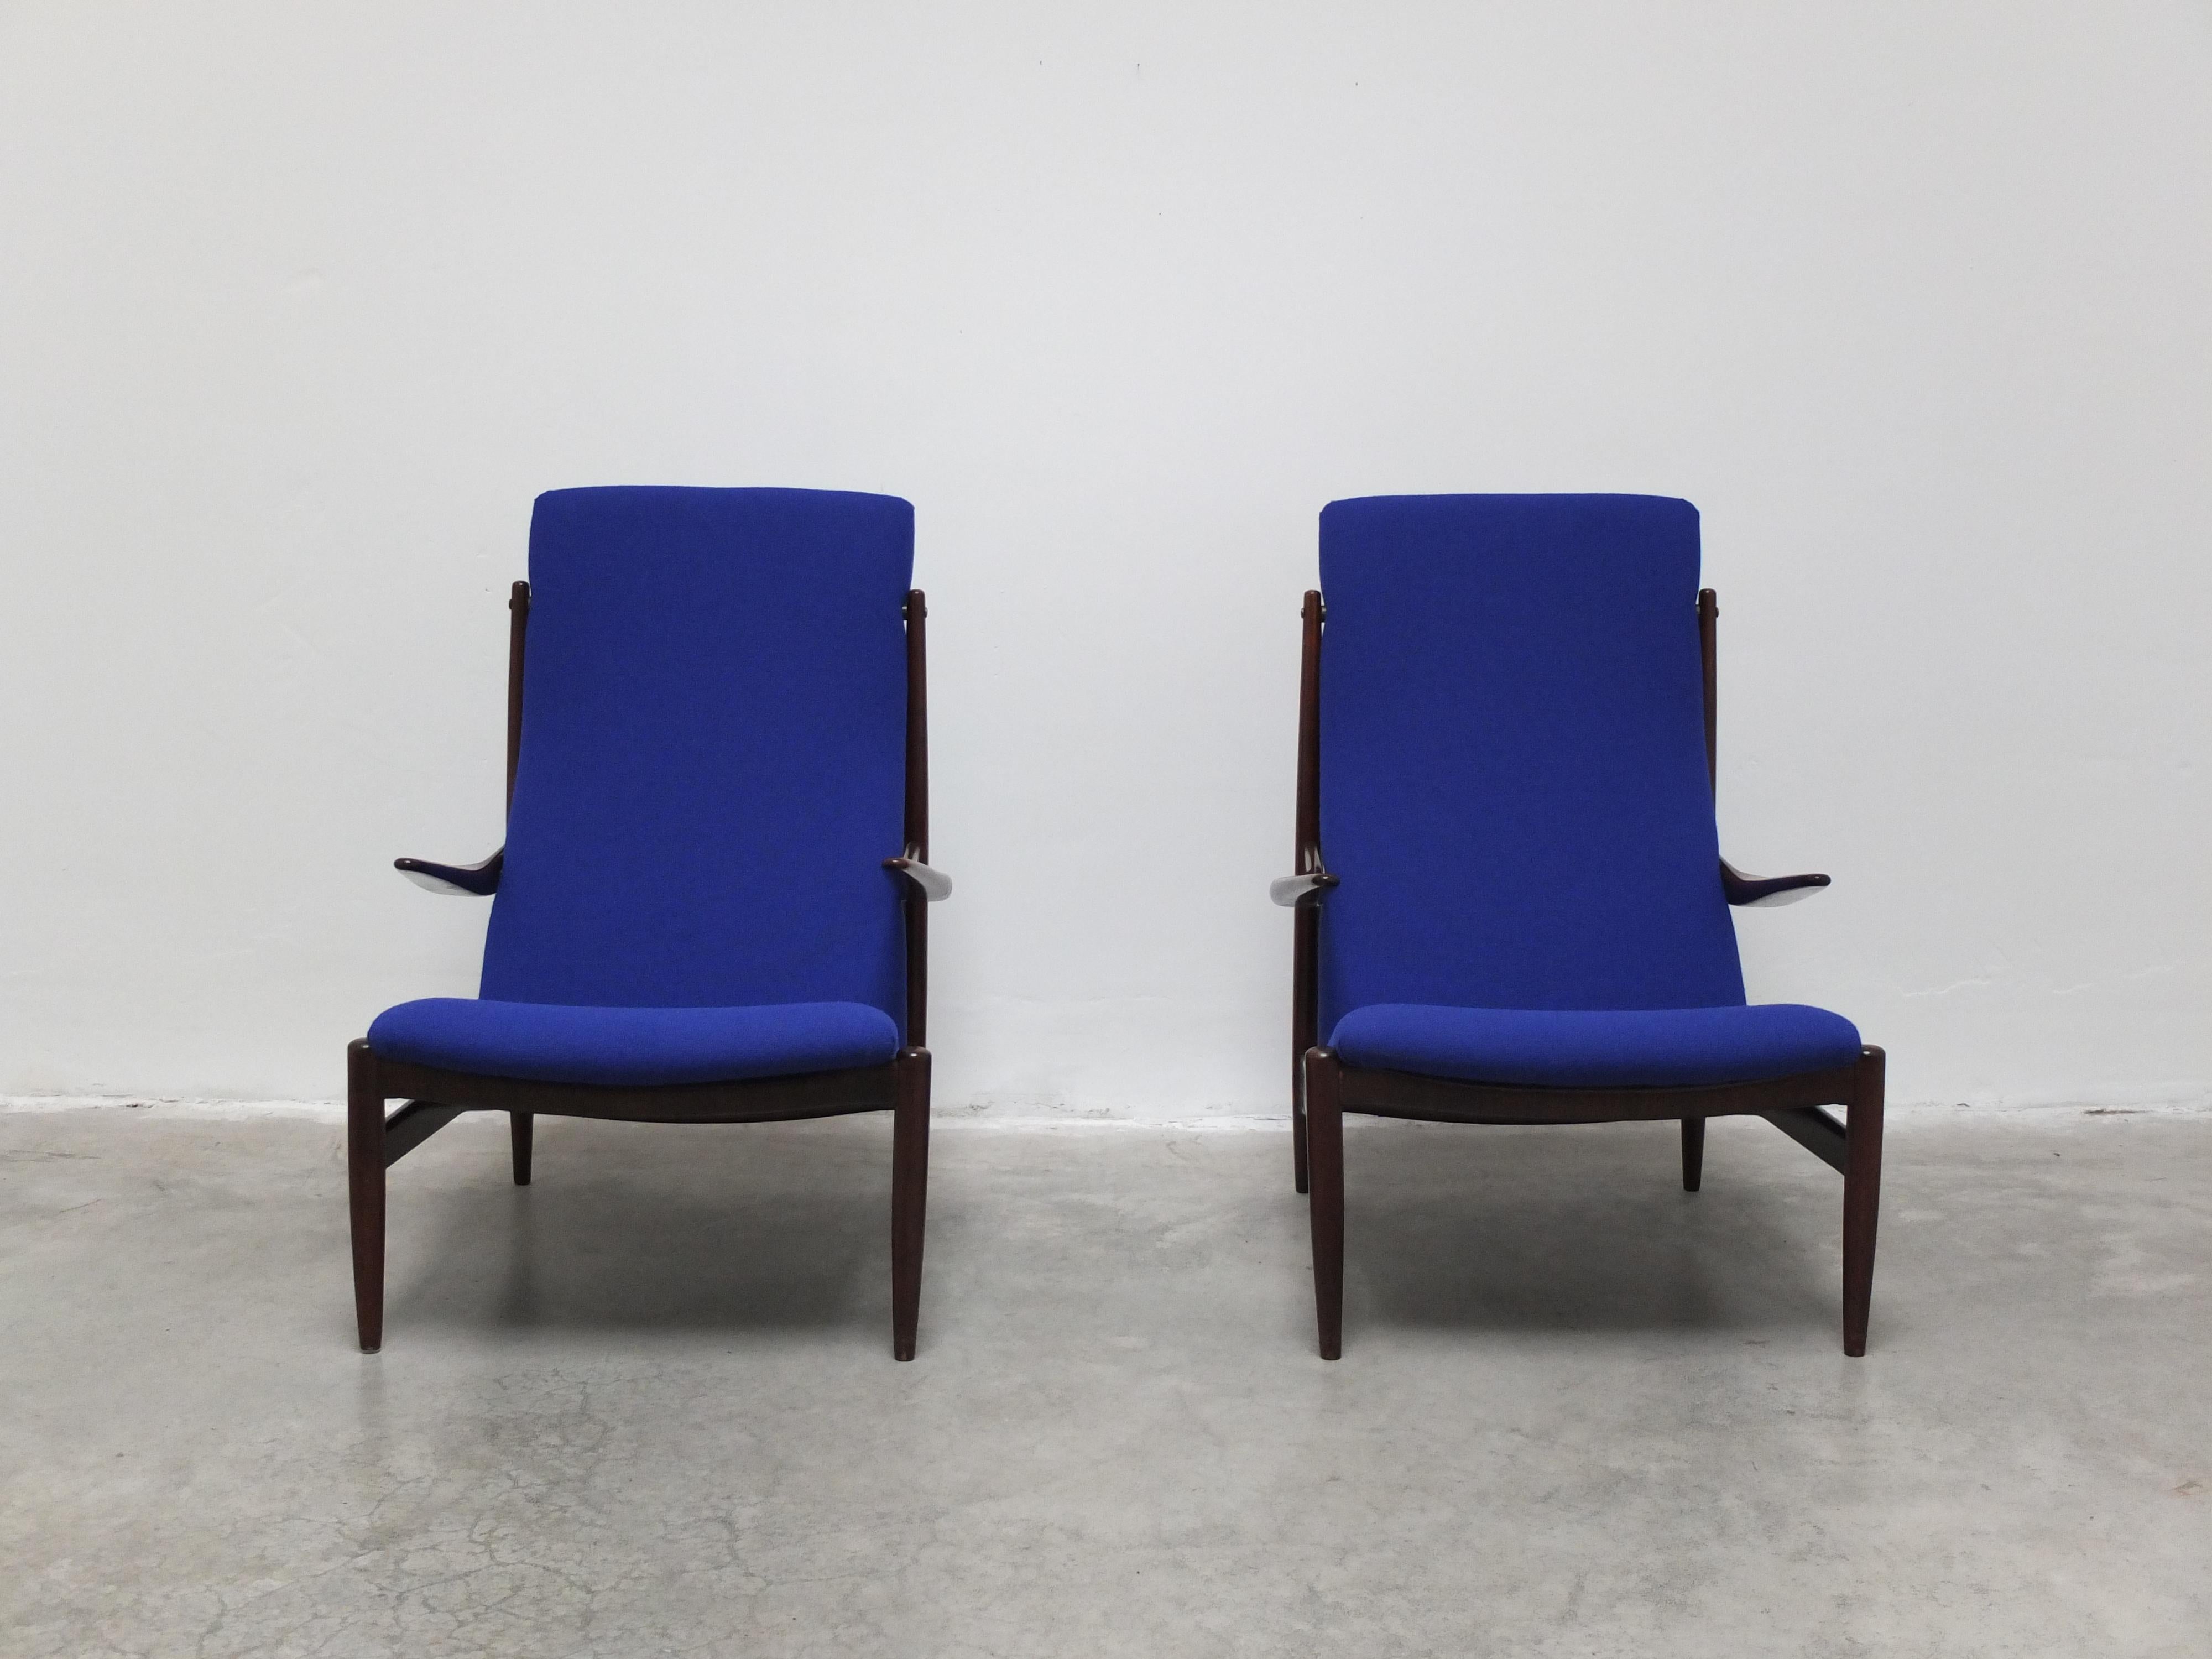 20th Century Rare Pair of Lounge Chairs by Alfred Hendrickx for Belform, 1950s For Sale